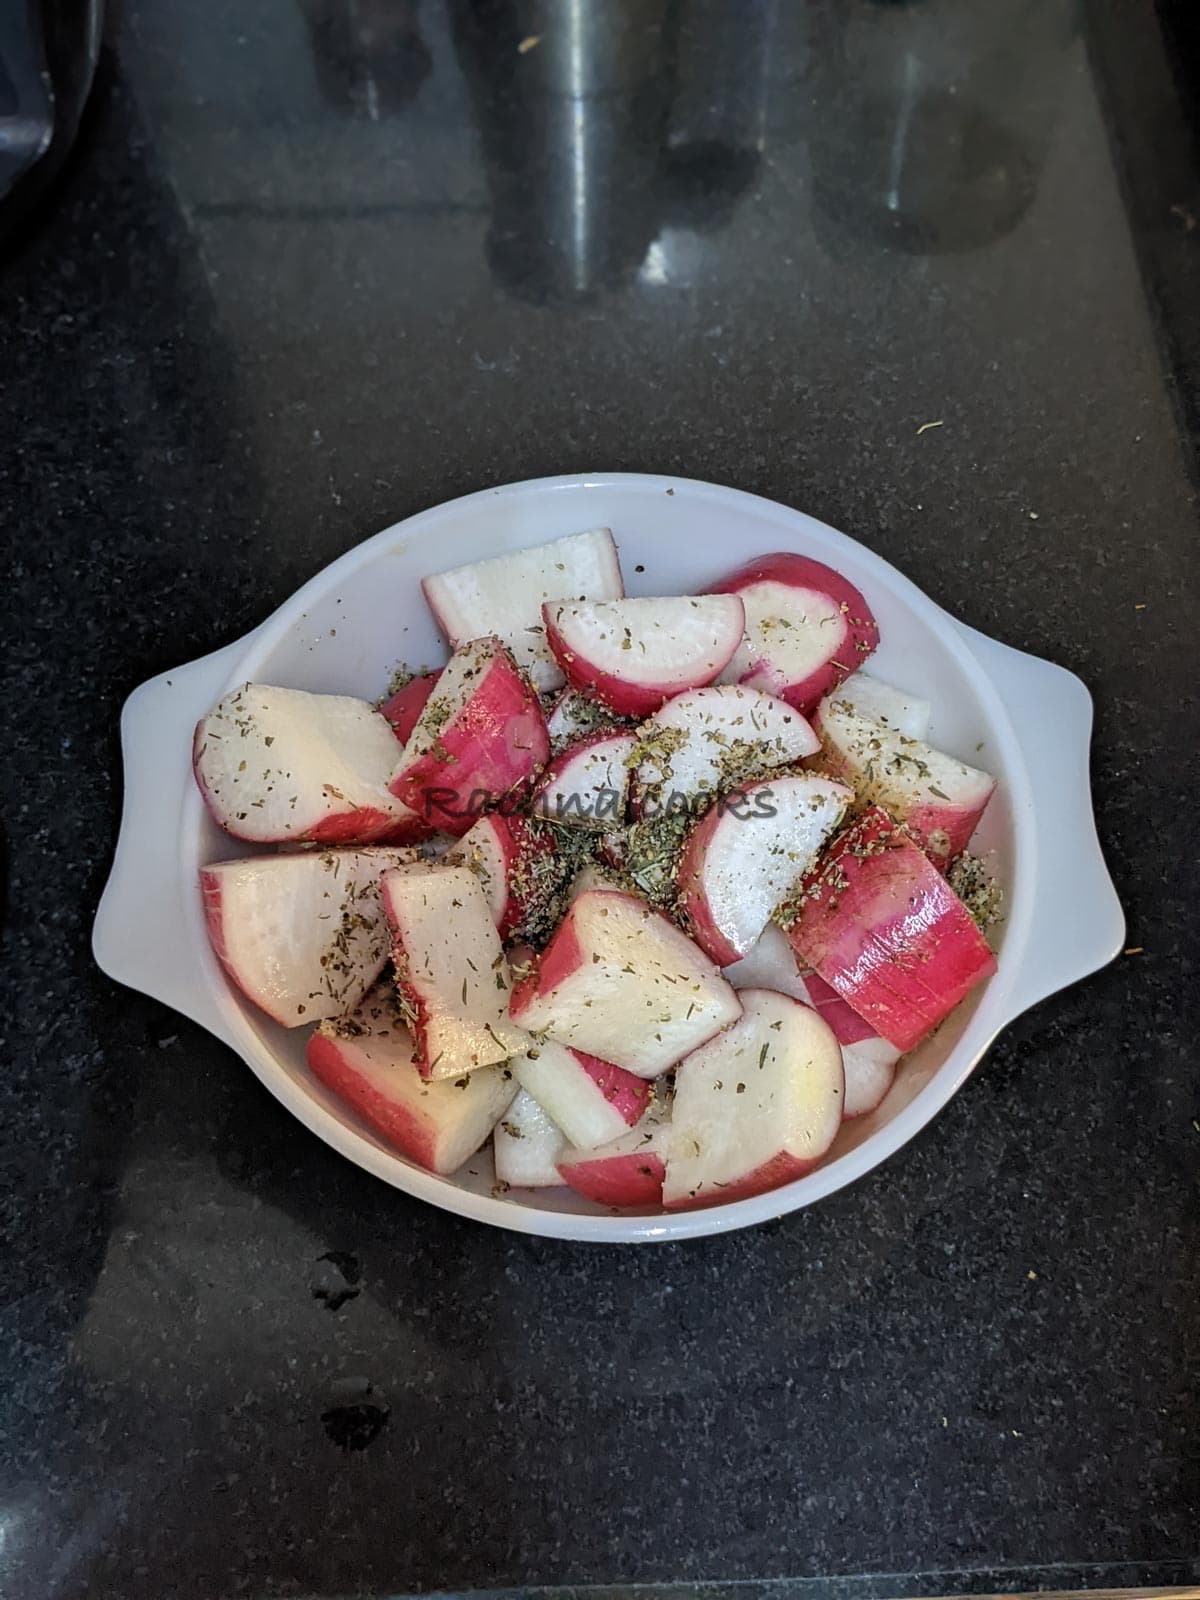 Radishes cut in halves or quarters marinated in oil and spices